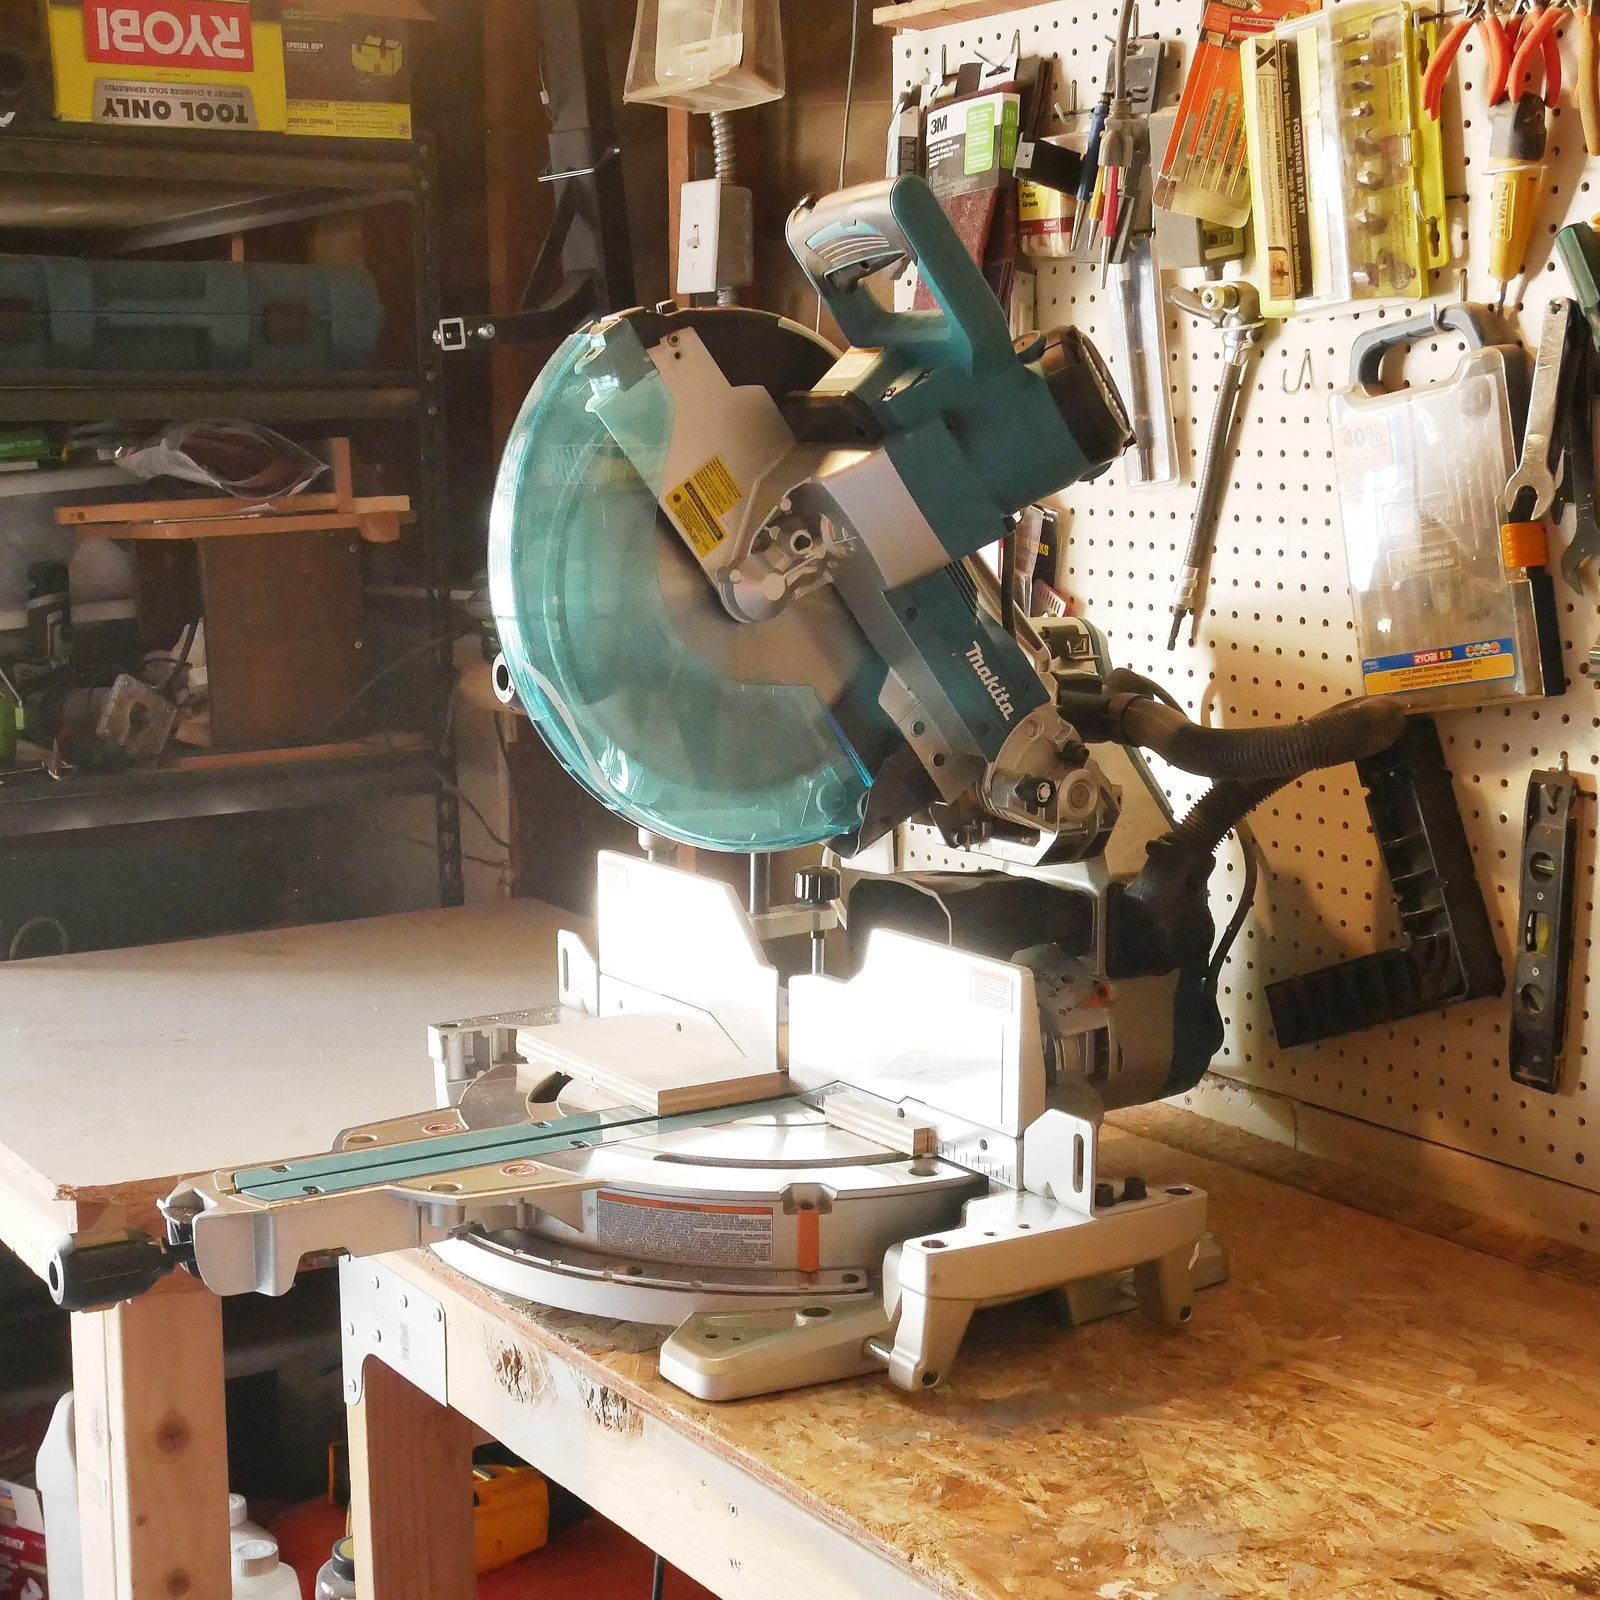 How To Use a Miter Saw